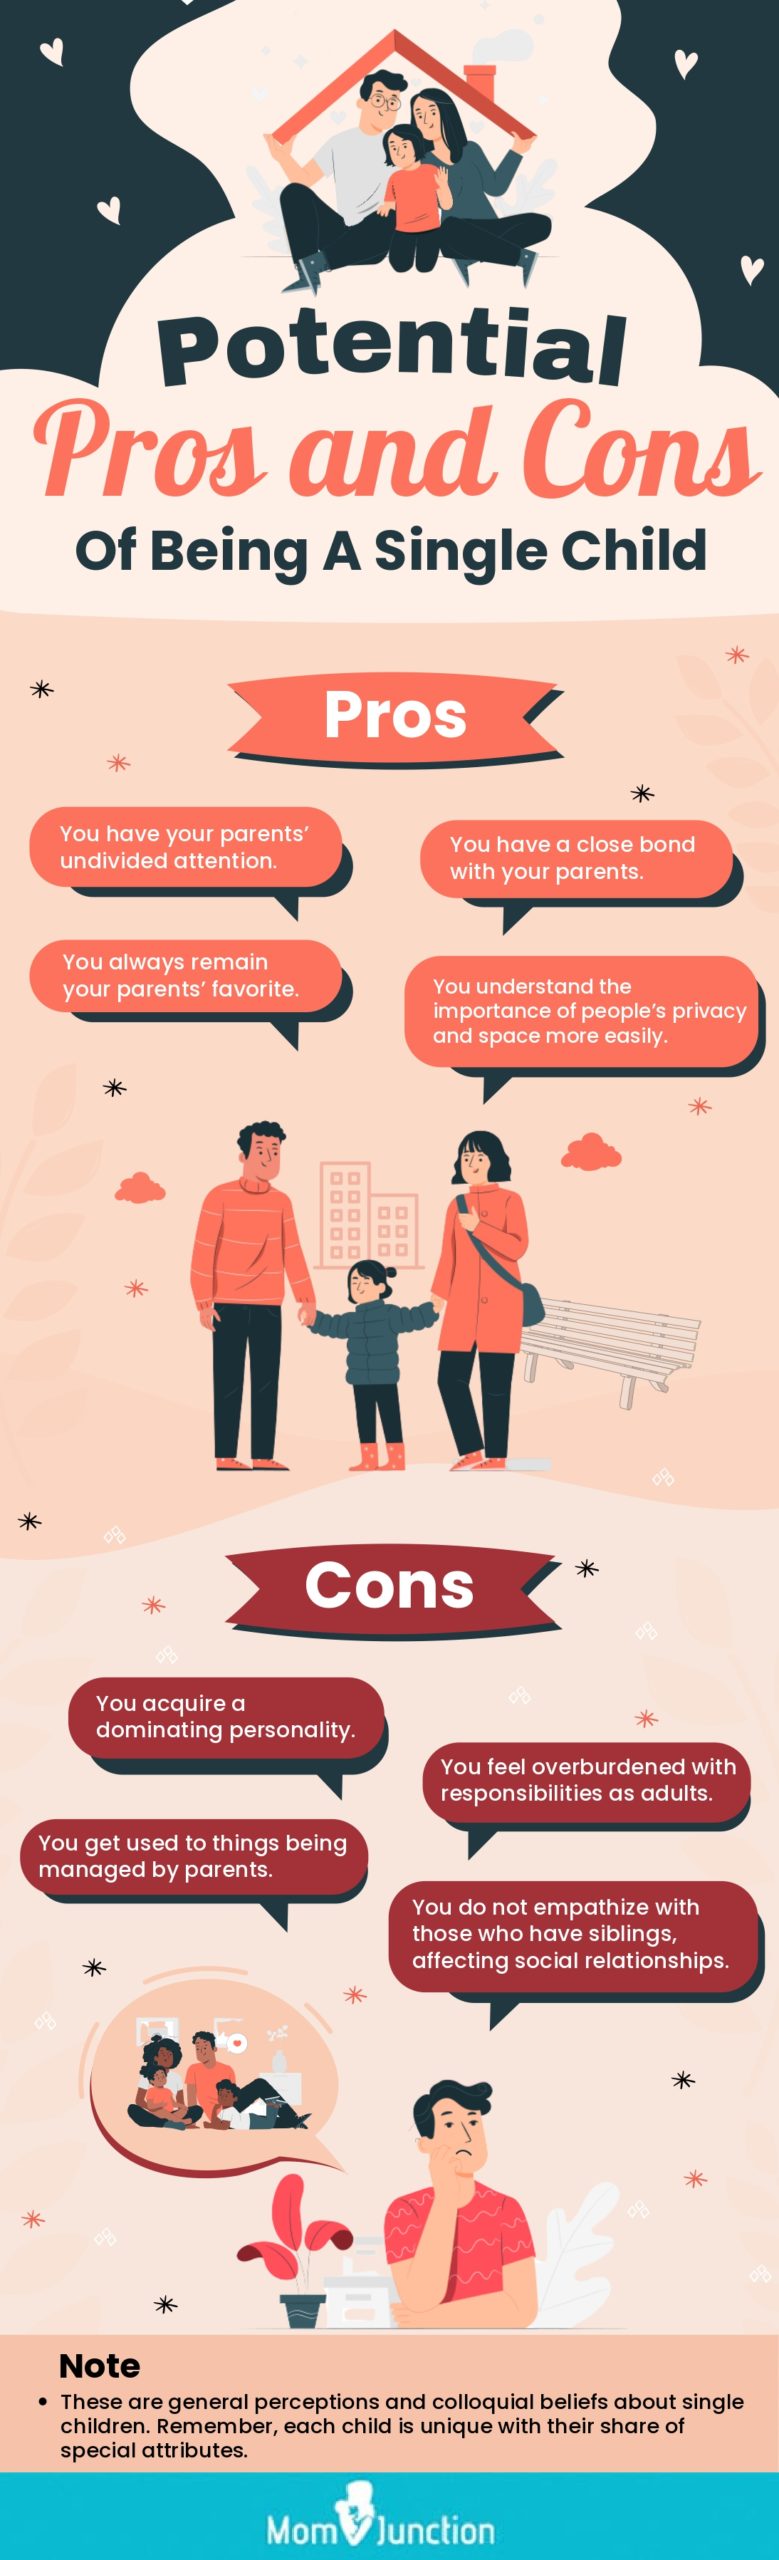 pros and cons of being a single child (infographic)